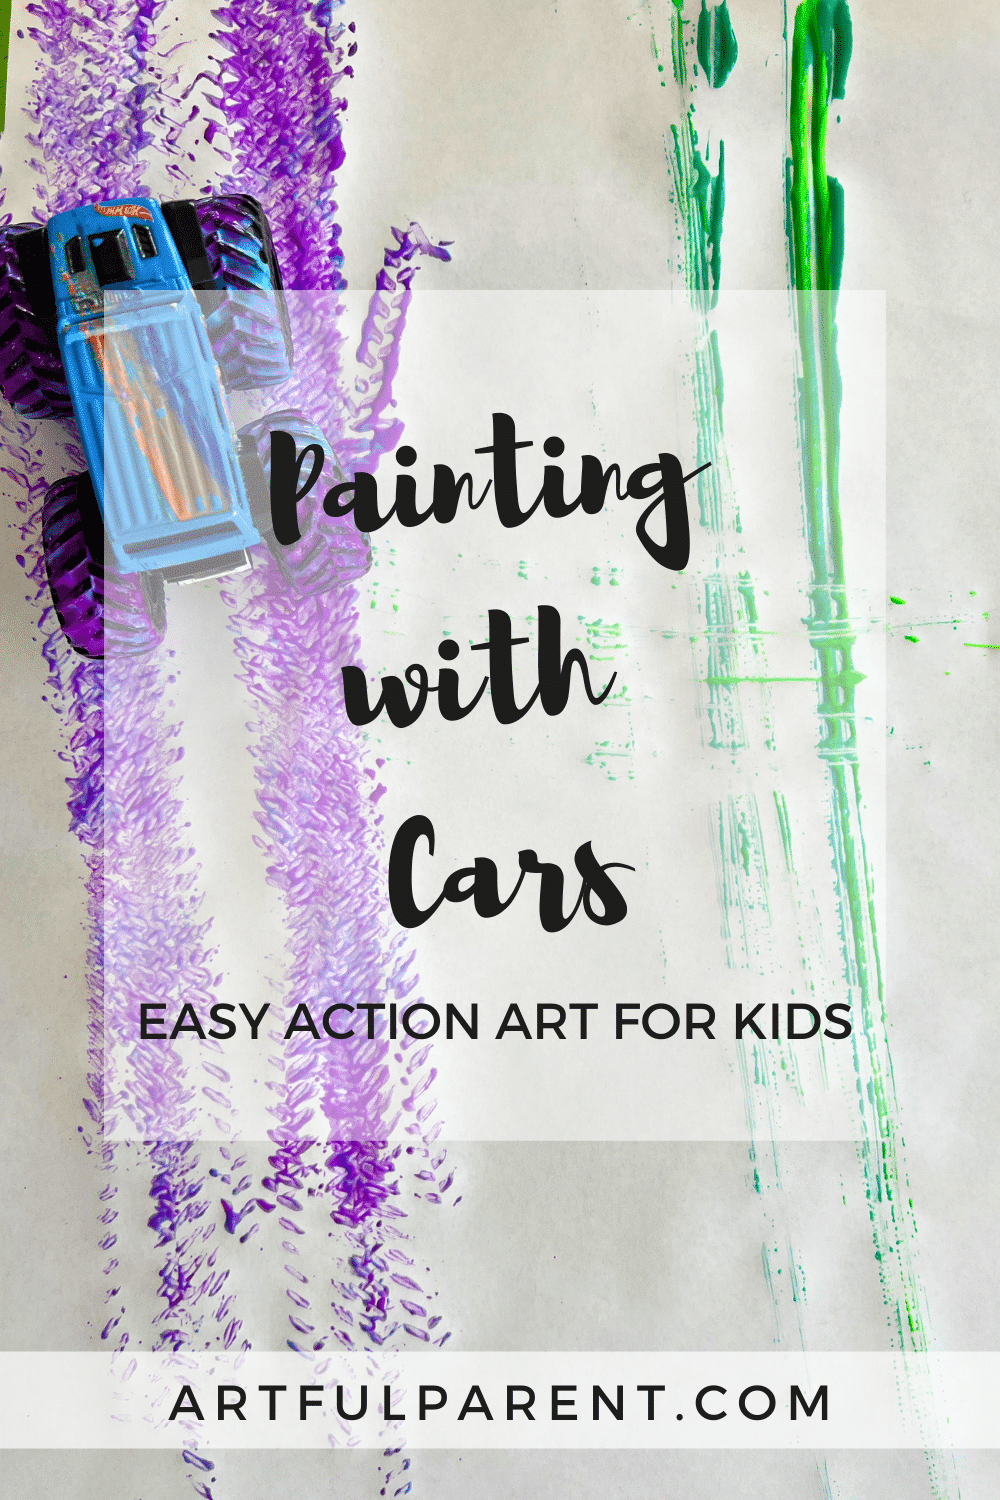 How to Paint with Cars: Easy Action Art for Kids